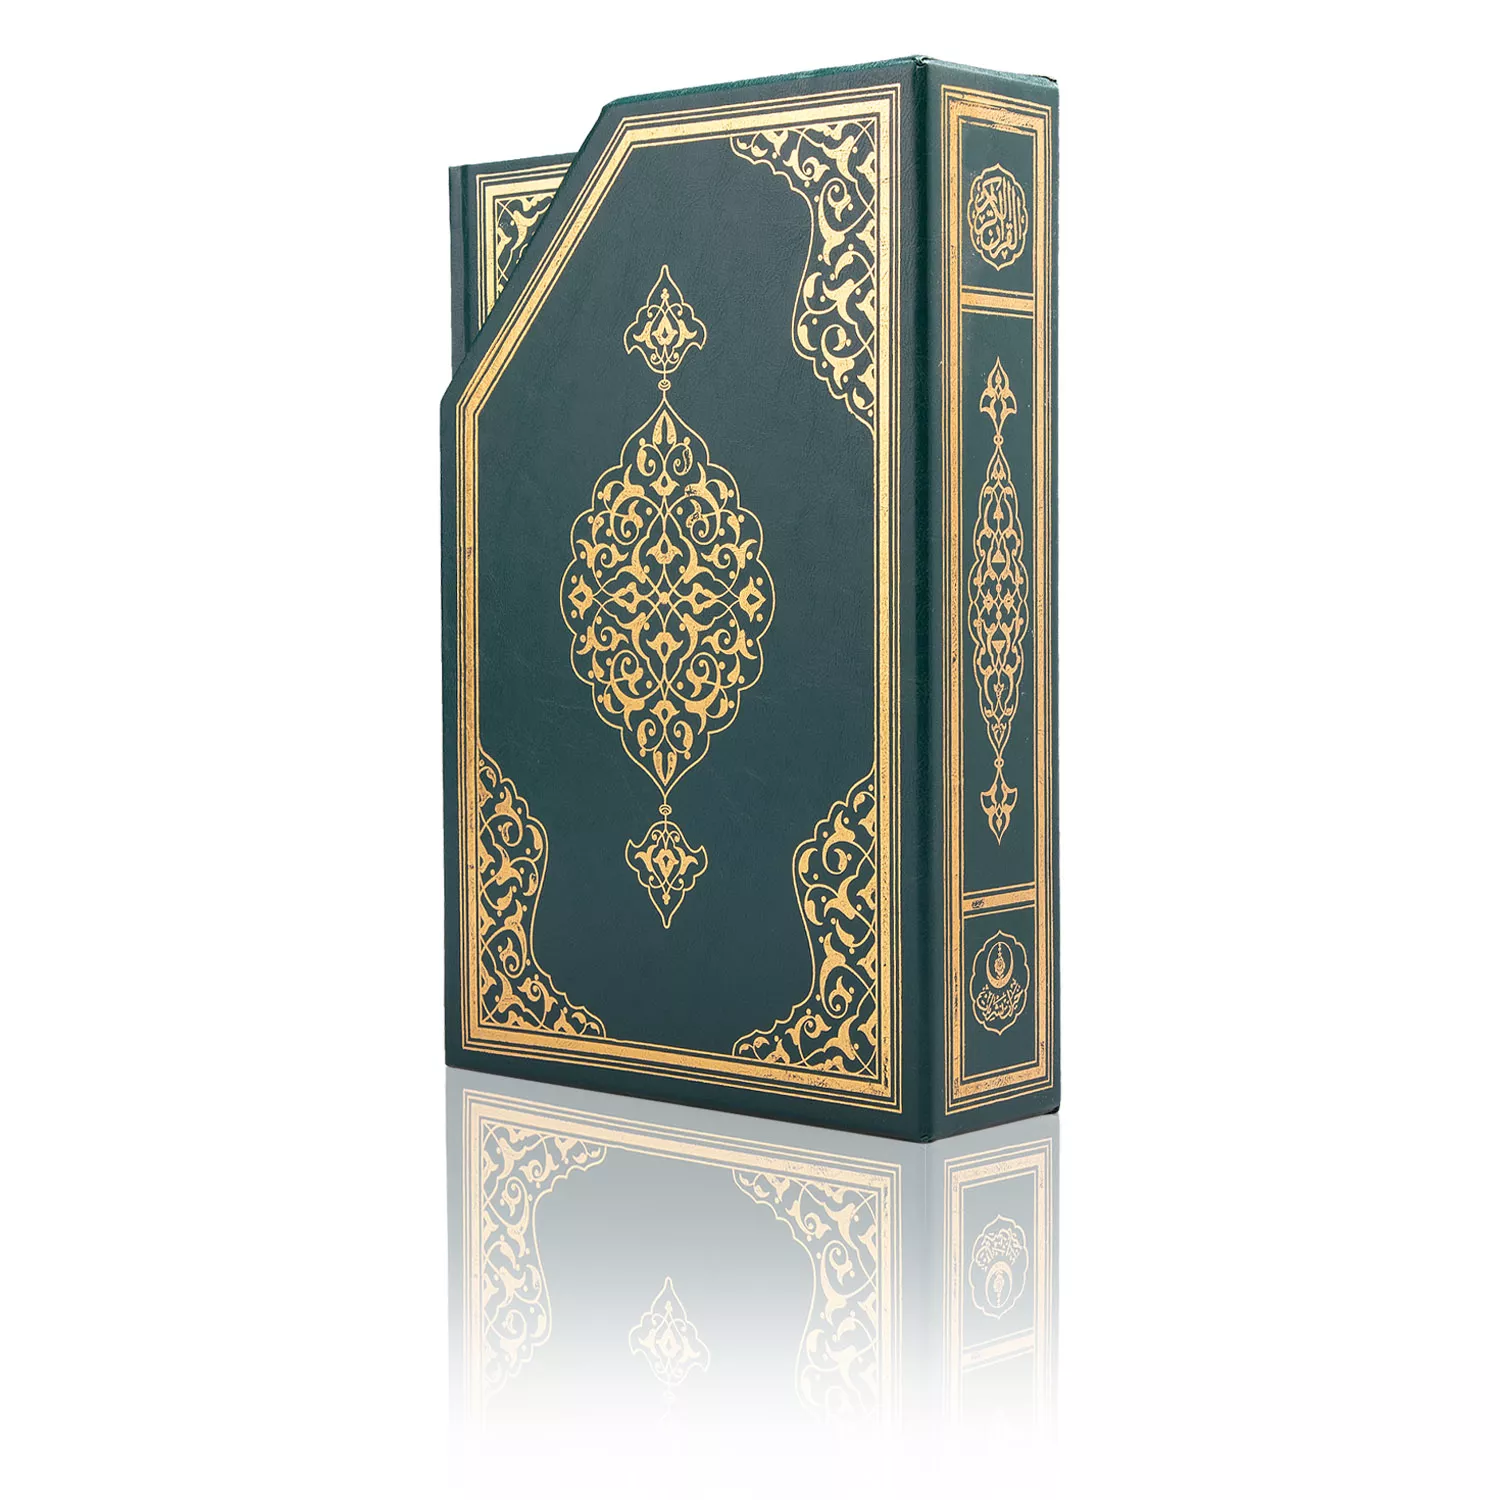 Bookrest Size 30-Juz-in-Five-Volume Qur'an Al-Kareem (Two-Colour, With Special Box, Stamped) - Thumbnail